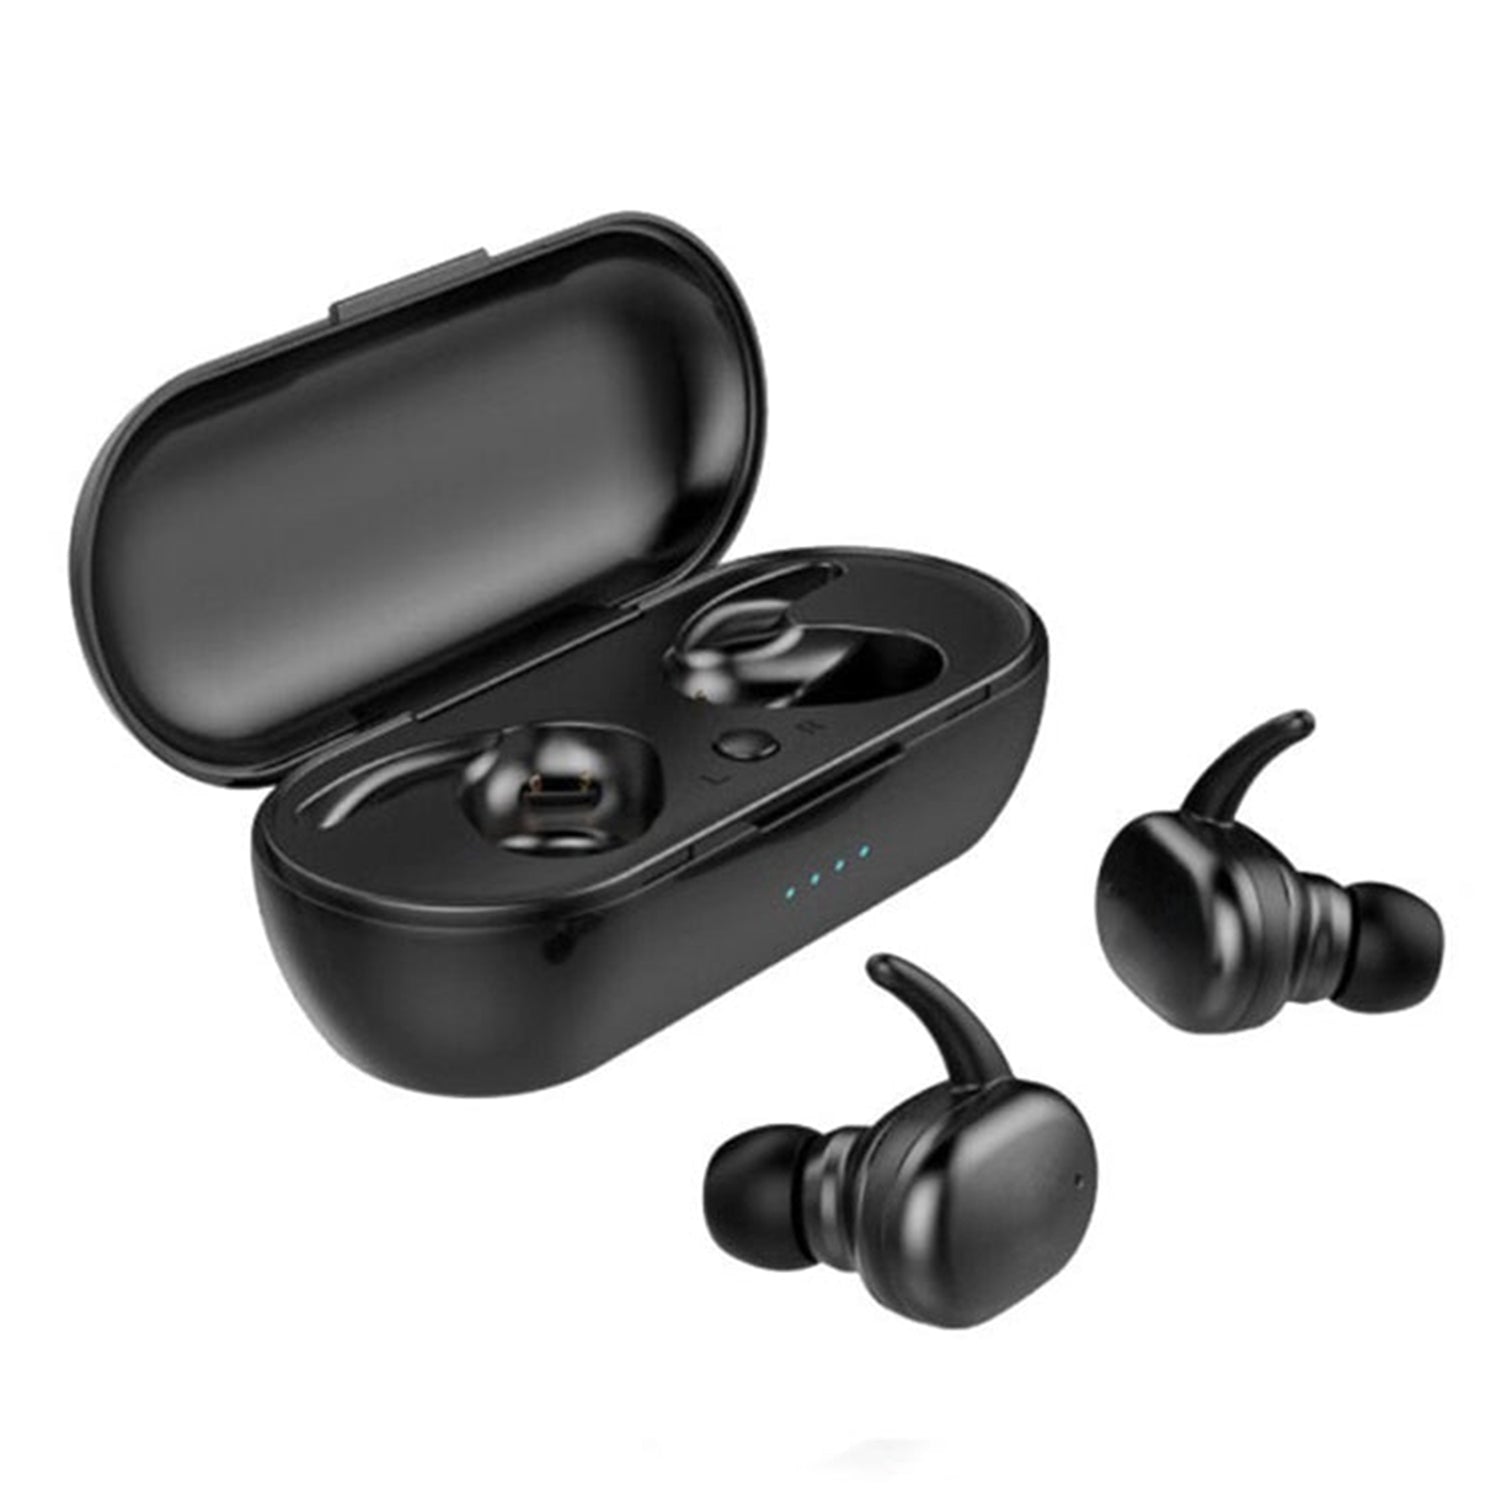 Bluetooth Headphones 5.0 True Wireless Earbuds Auto Pairing with Built in Mic and Portable Charging Case